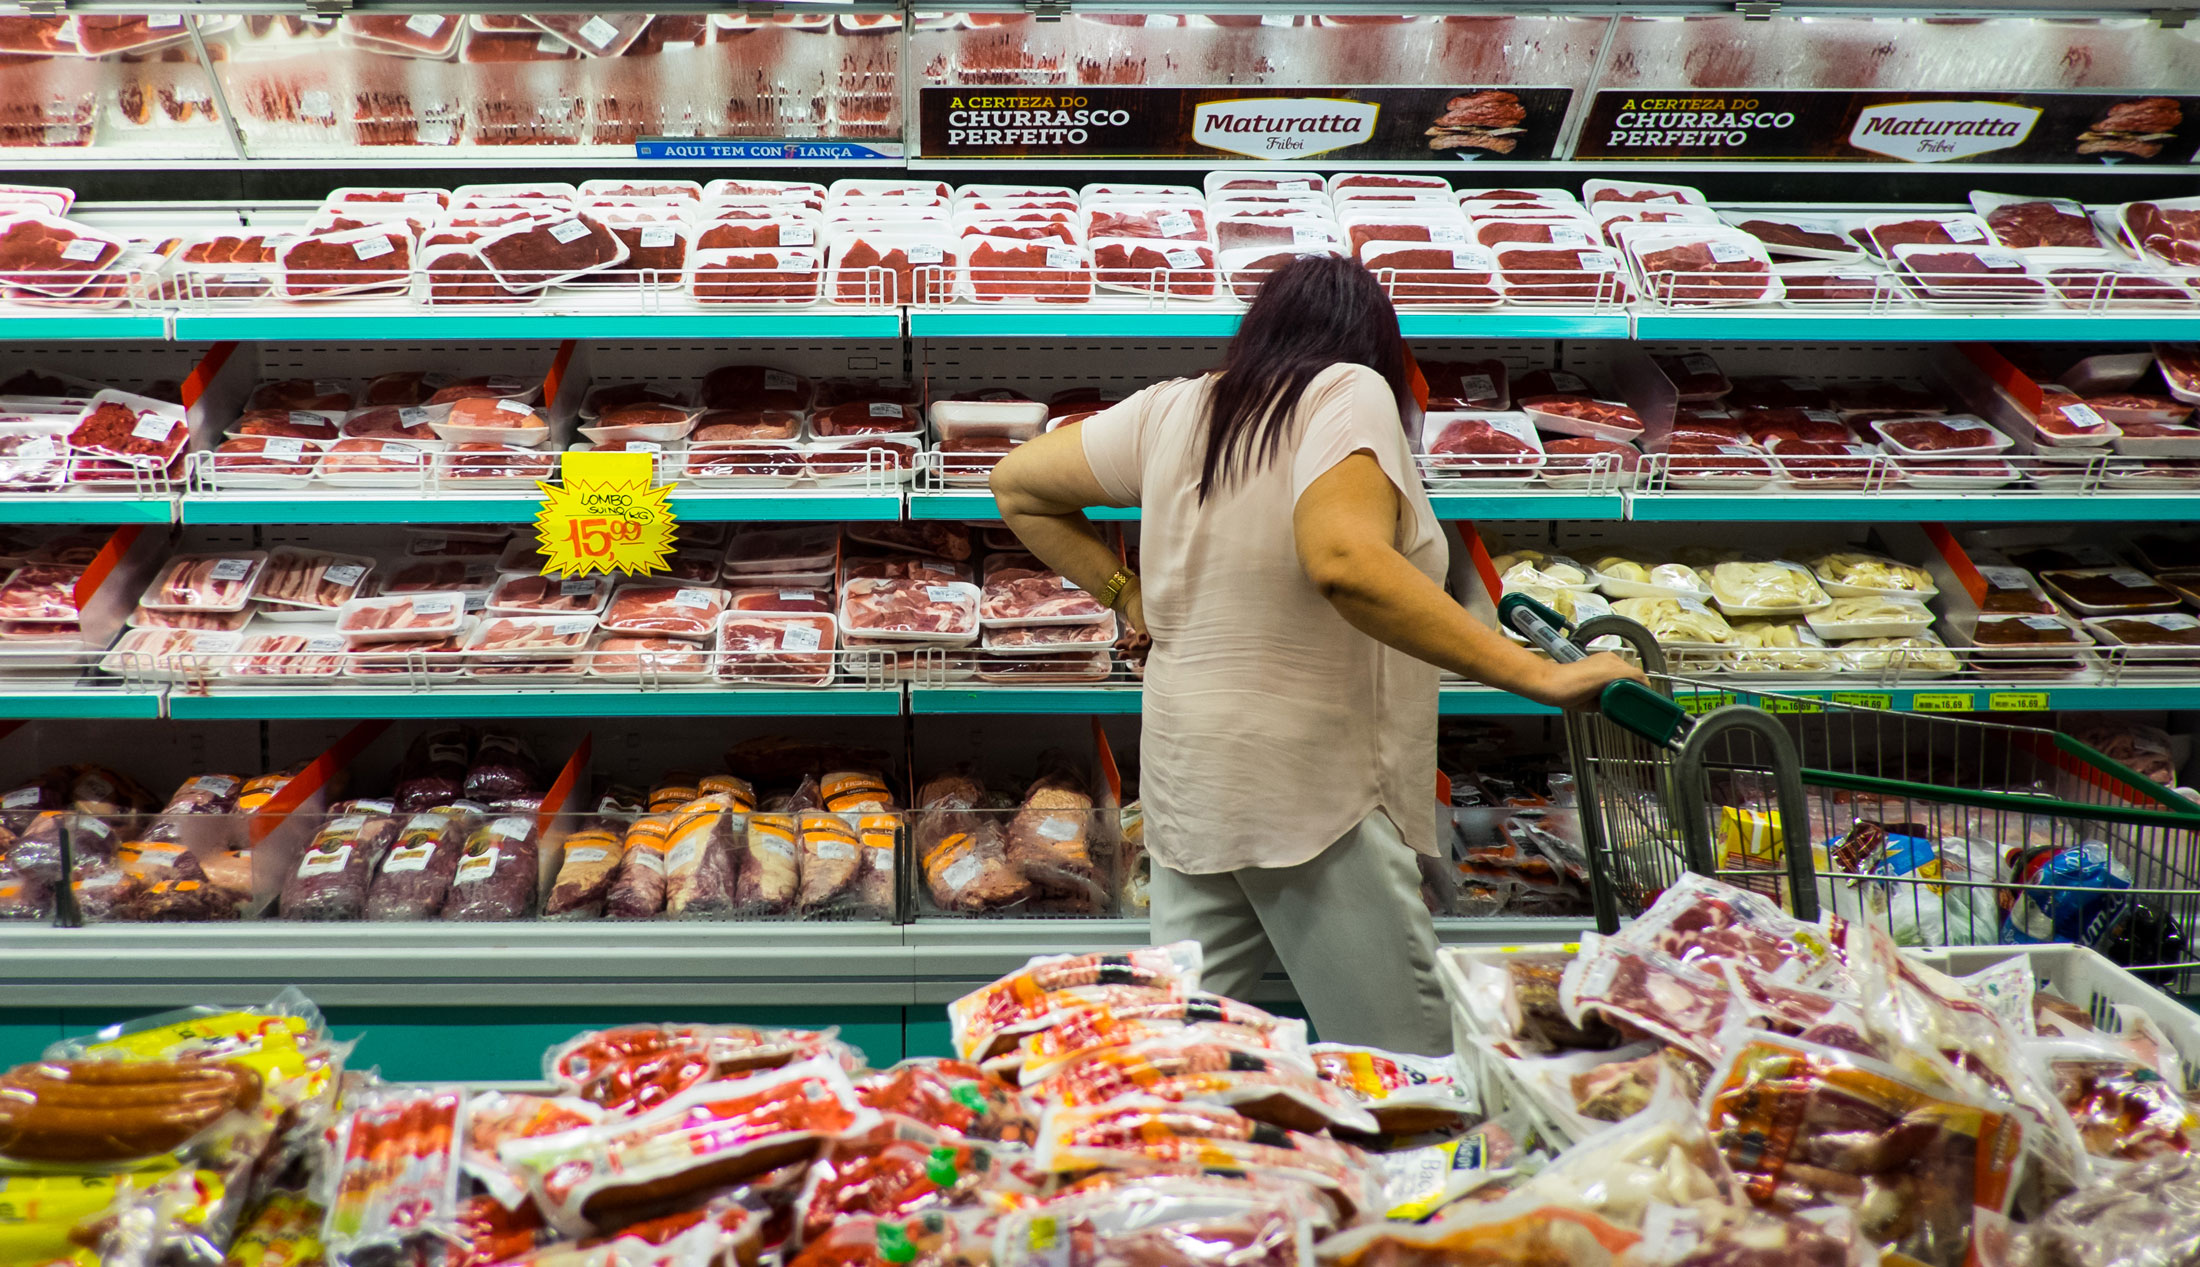 Brazil's Latest Scandal: Bribes, Acid and Tainted Meat Sales - Bloomberg